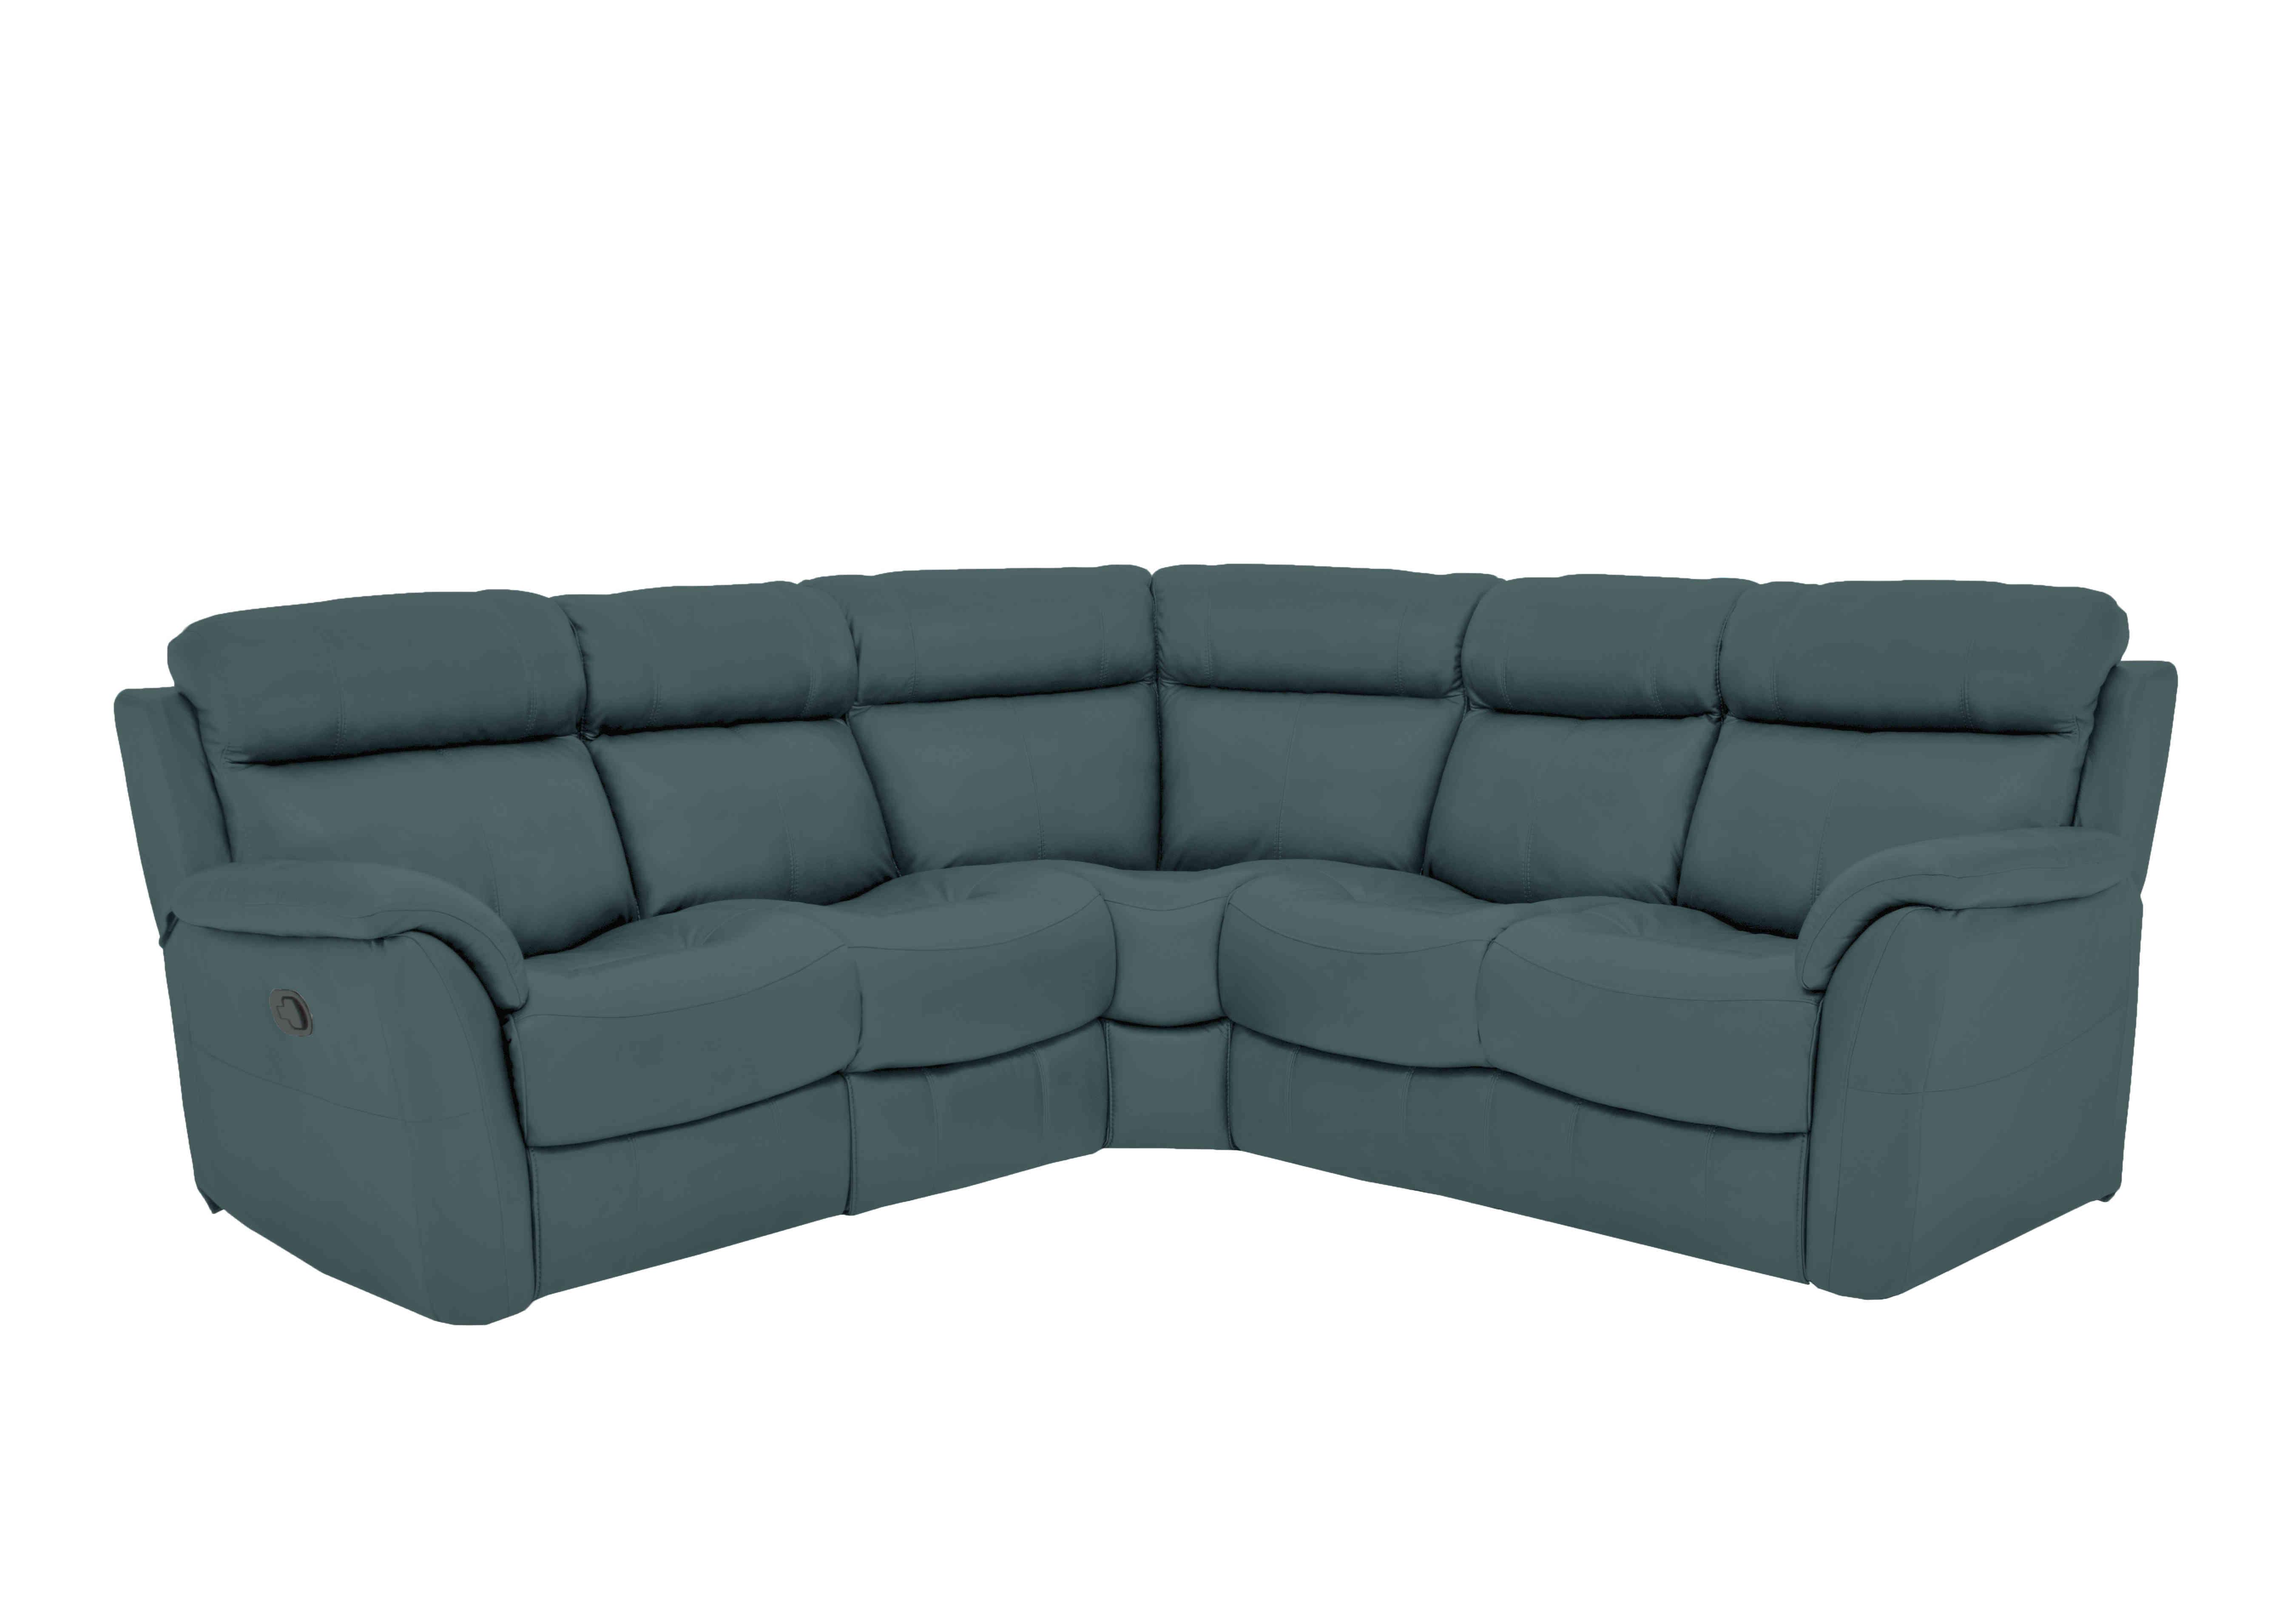 Relax Station Revive Leather Corner Sofa in Bv-301e Lake Green on Furniture Village